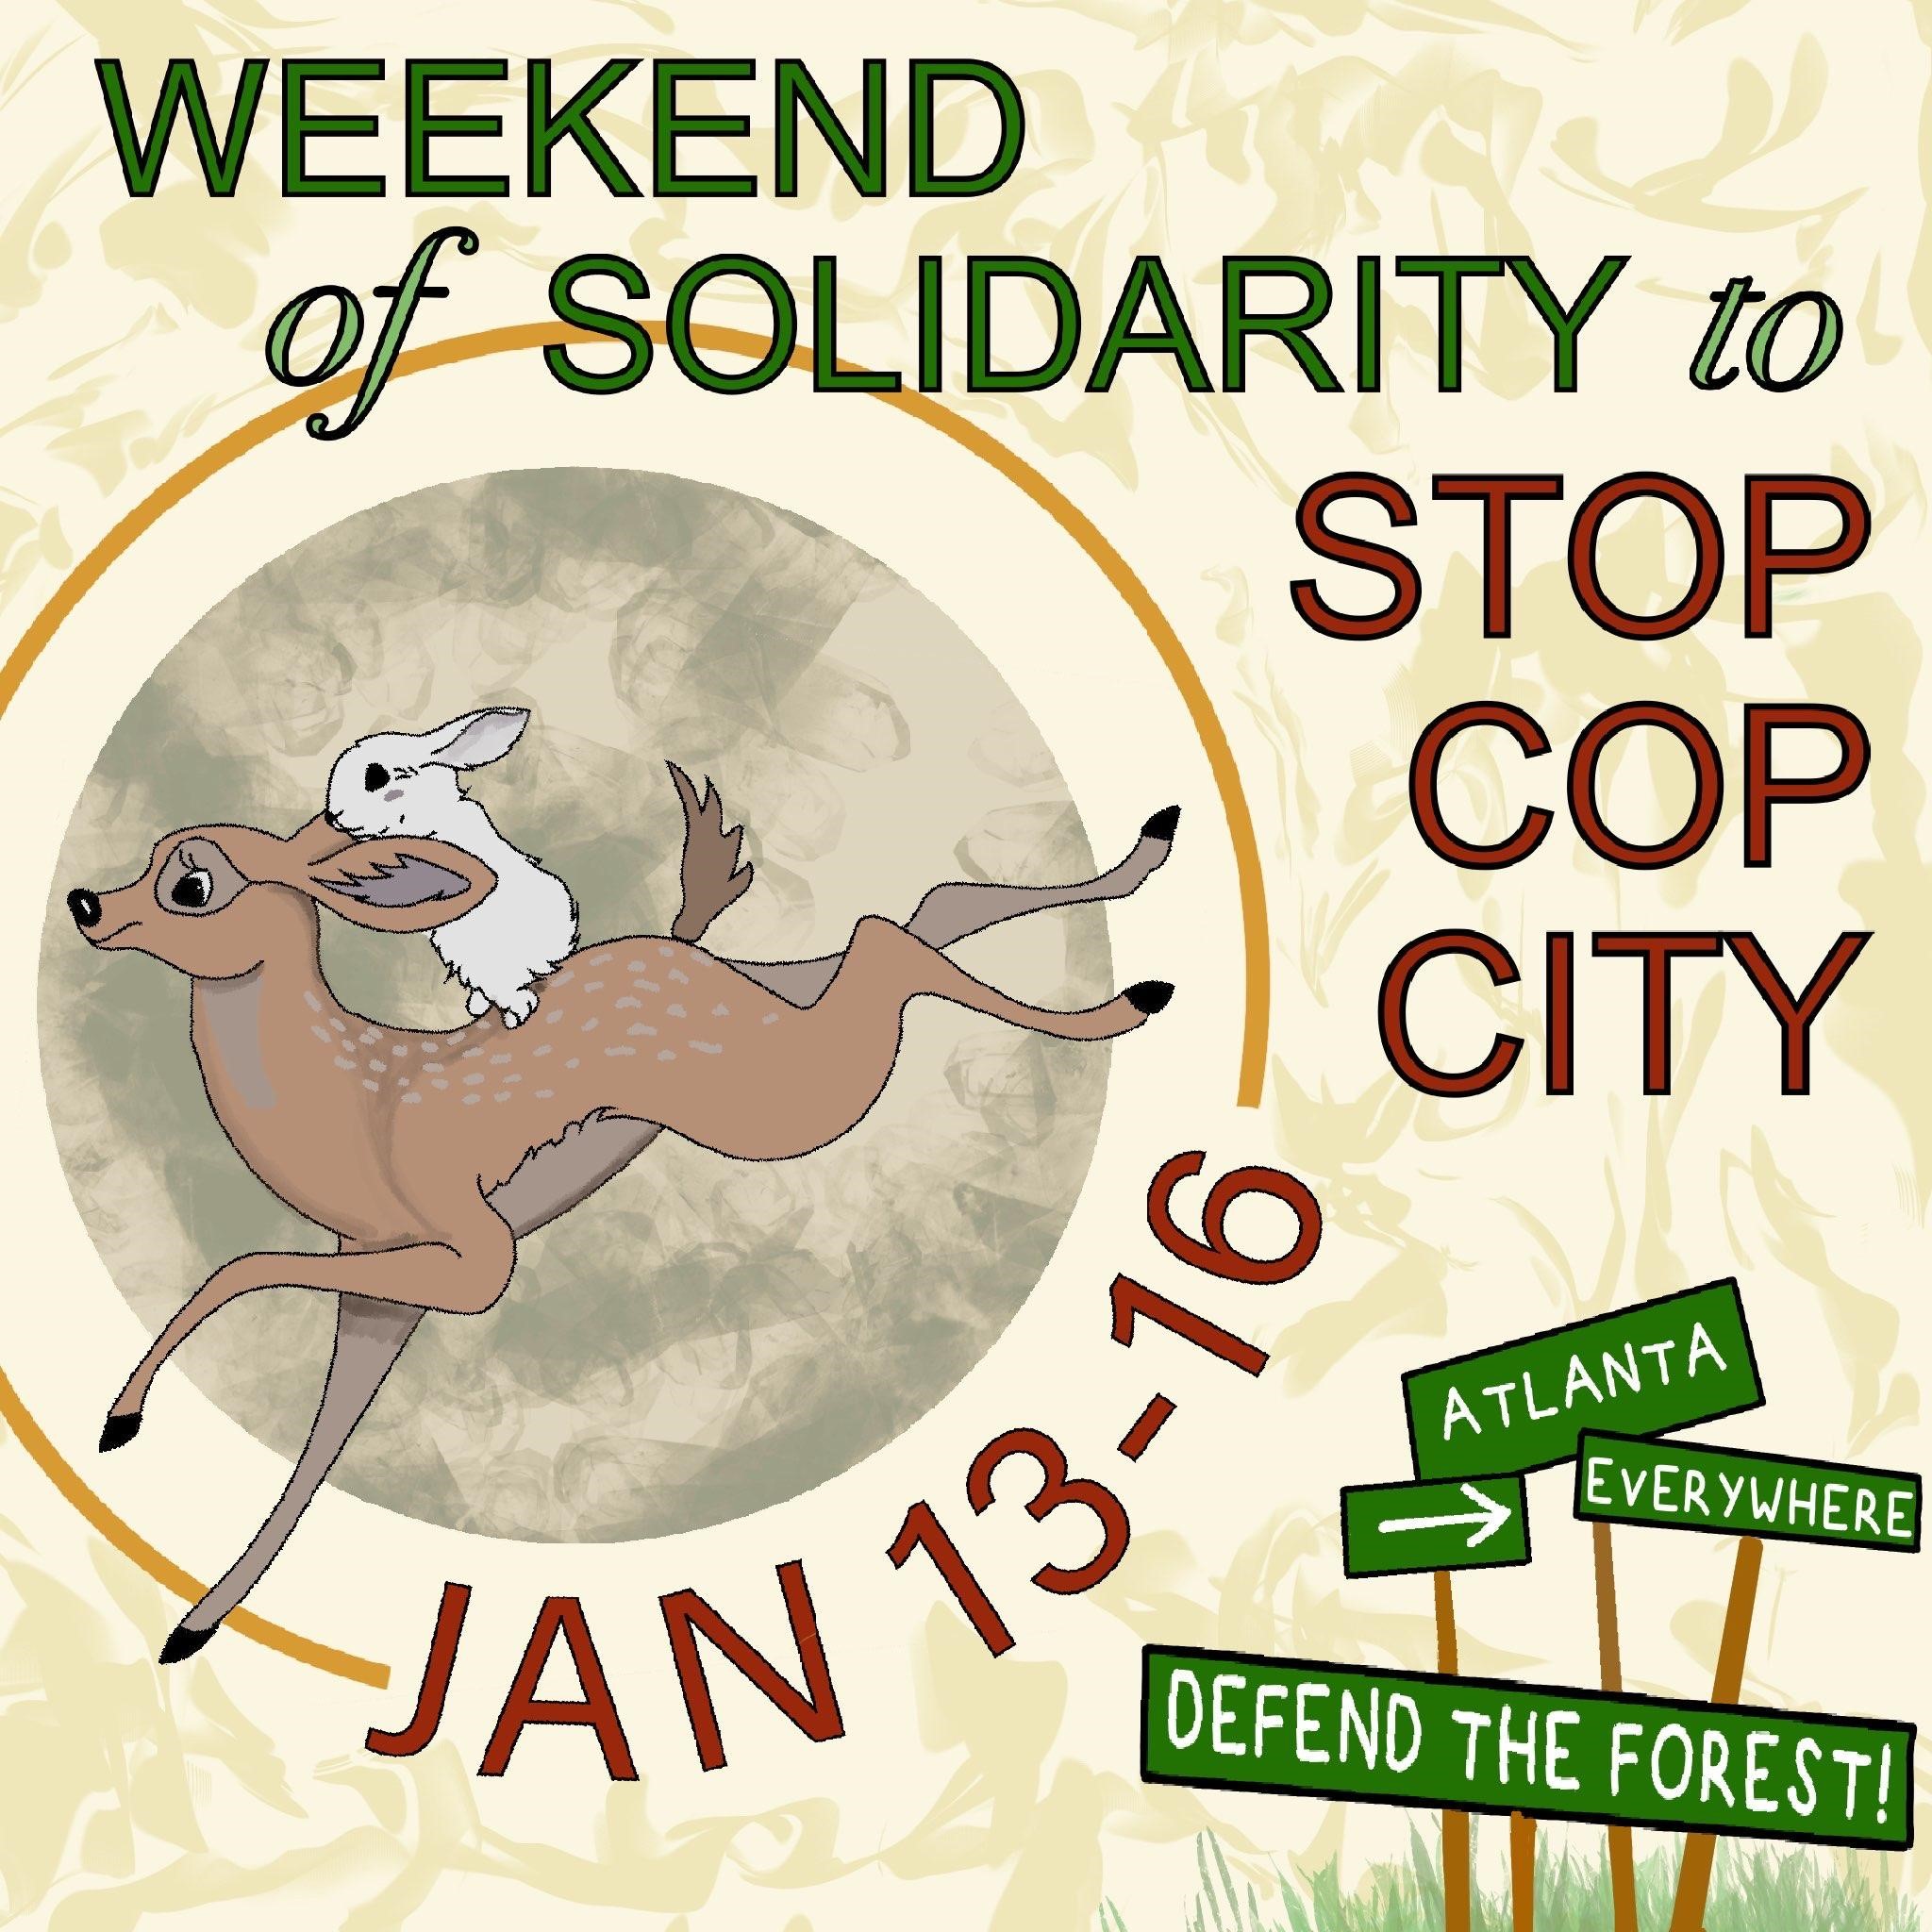 An illustration of a rabbit riding a deer jumping over a moon. Text reads "Weekend of solidarity to stop cop city, Jan 13-16." Illustrated road signs in the bottom right read "Atlanta to Everywhere, Defend the Forest!"